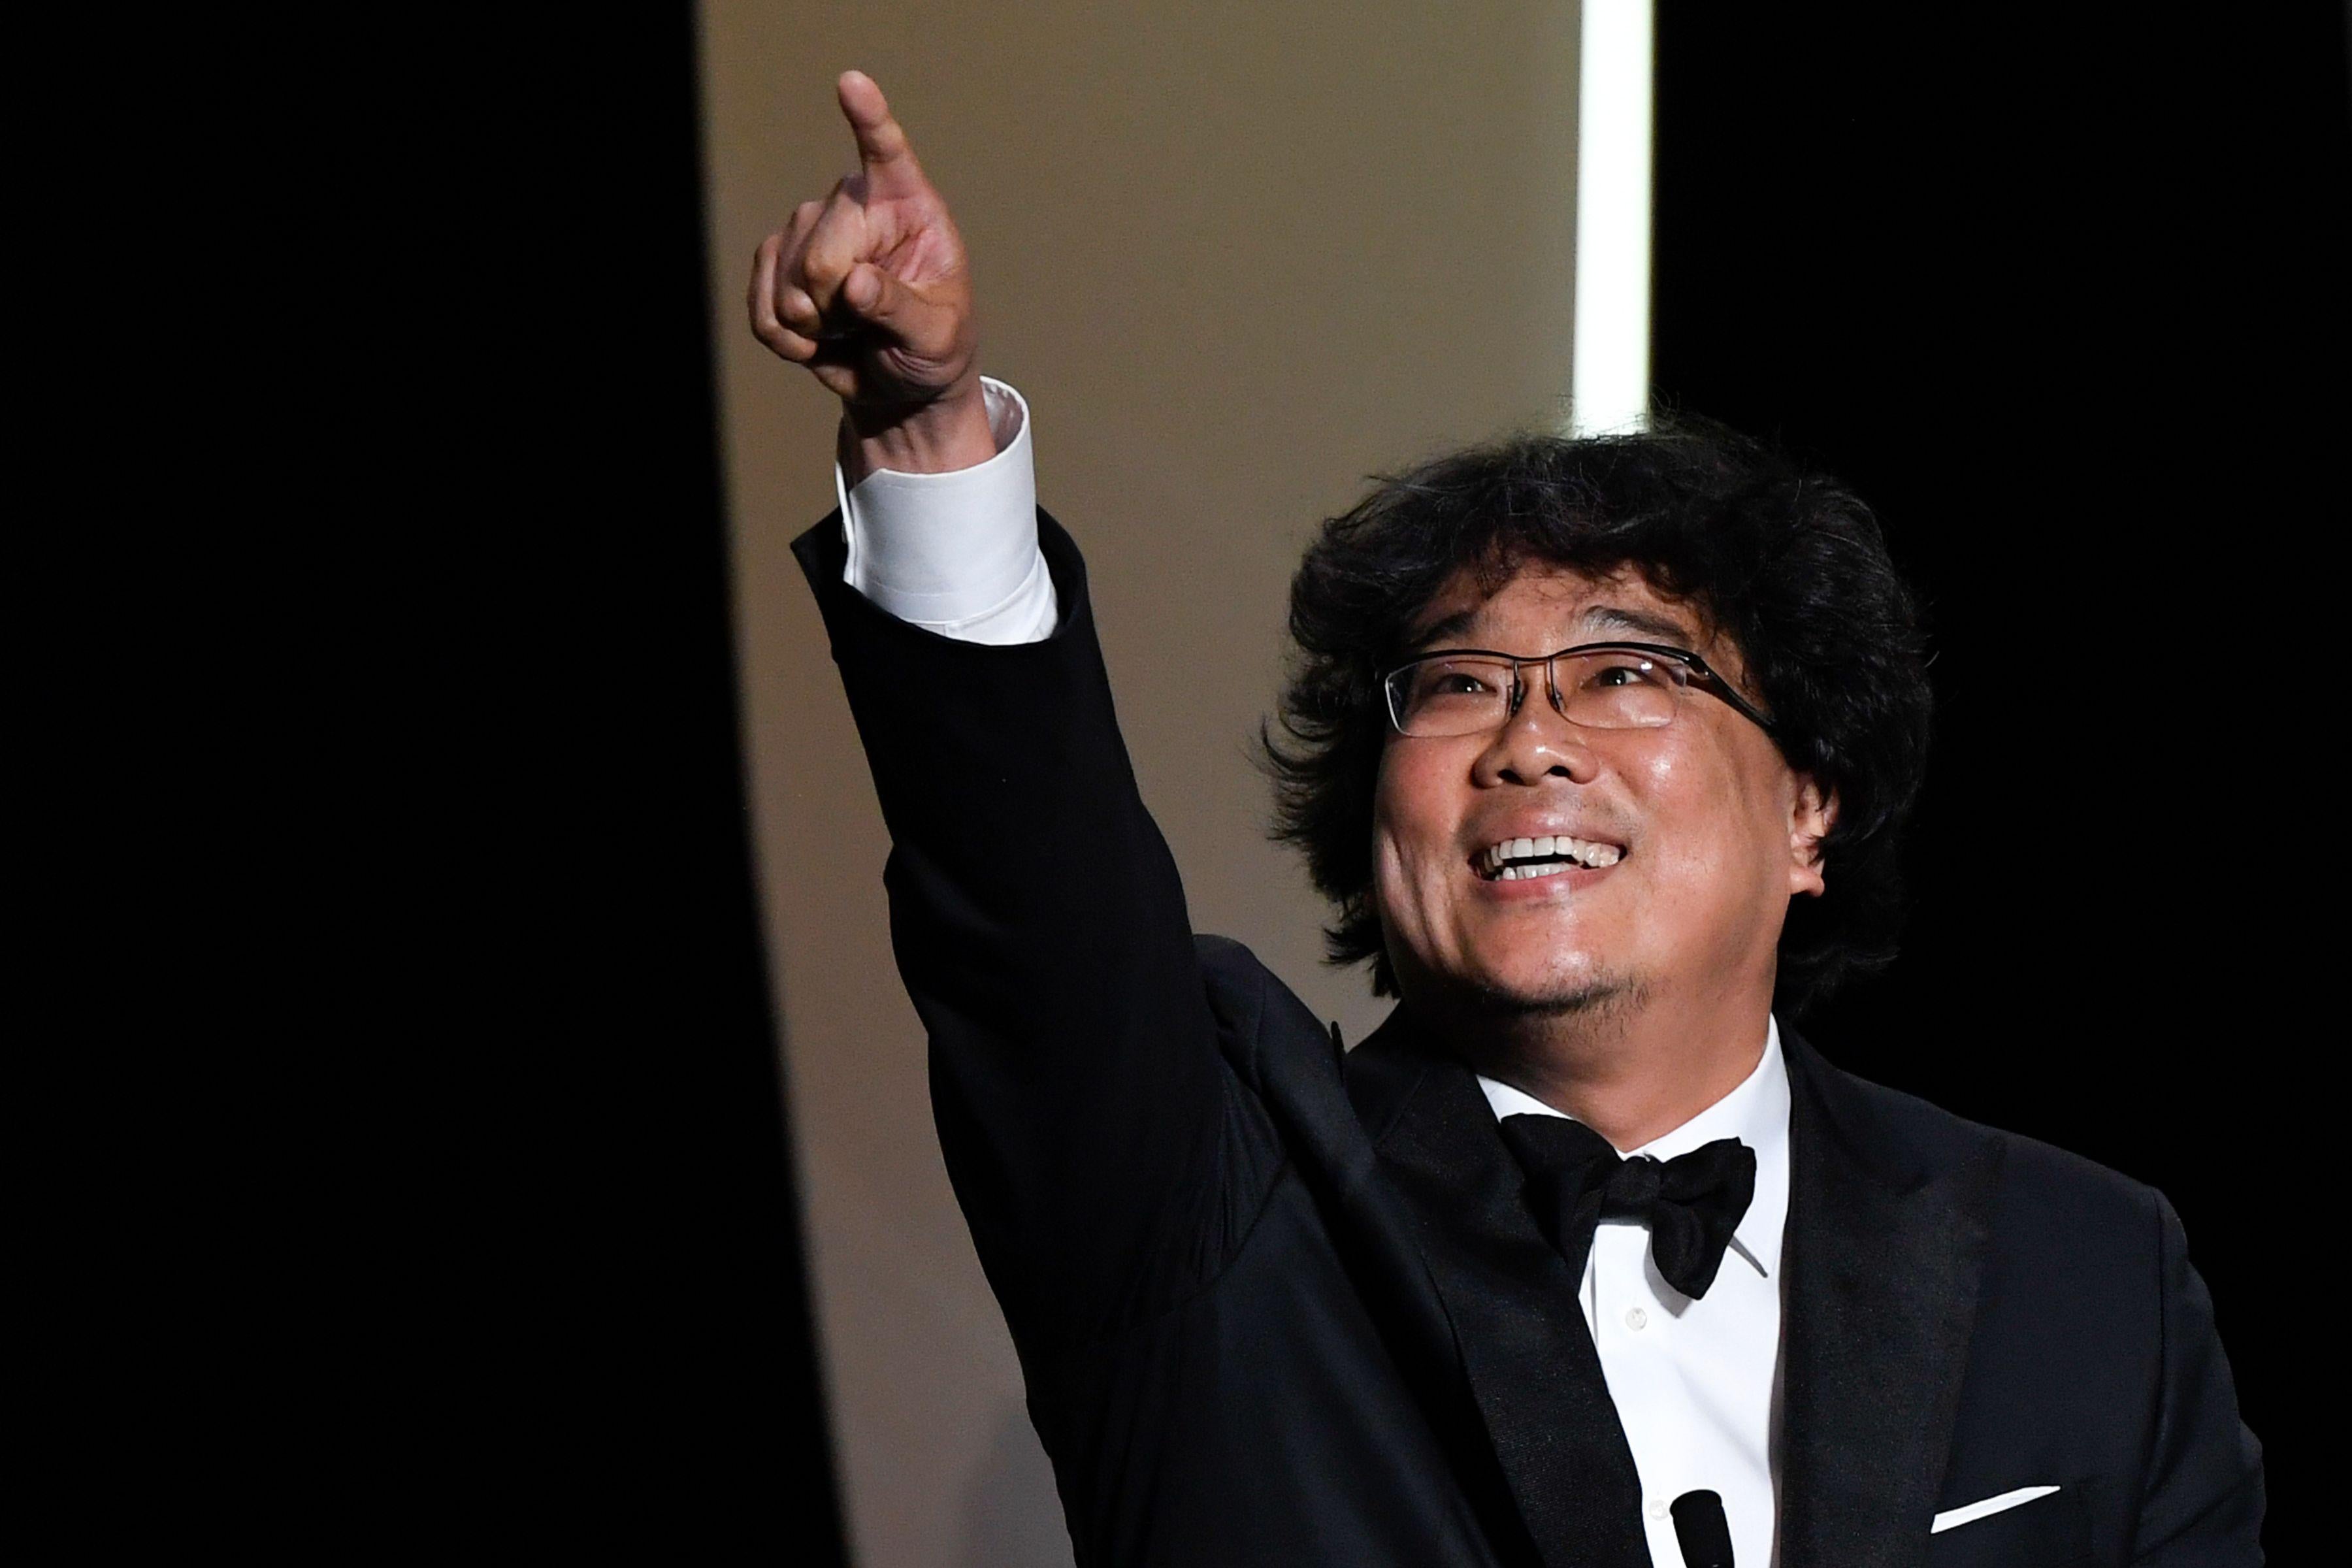 Director Bong Joon-ho smiles and raises his hand in triumph.